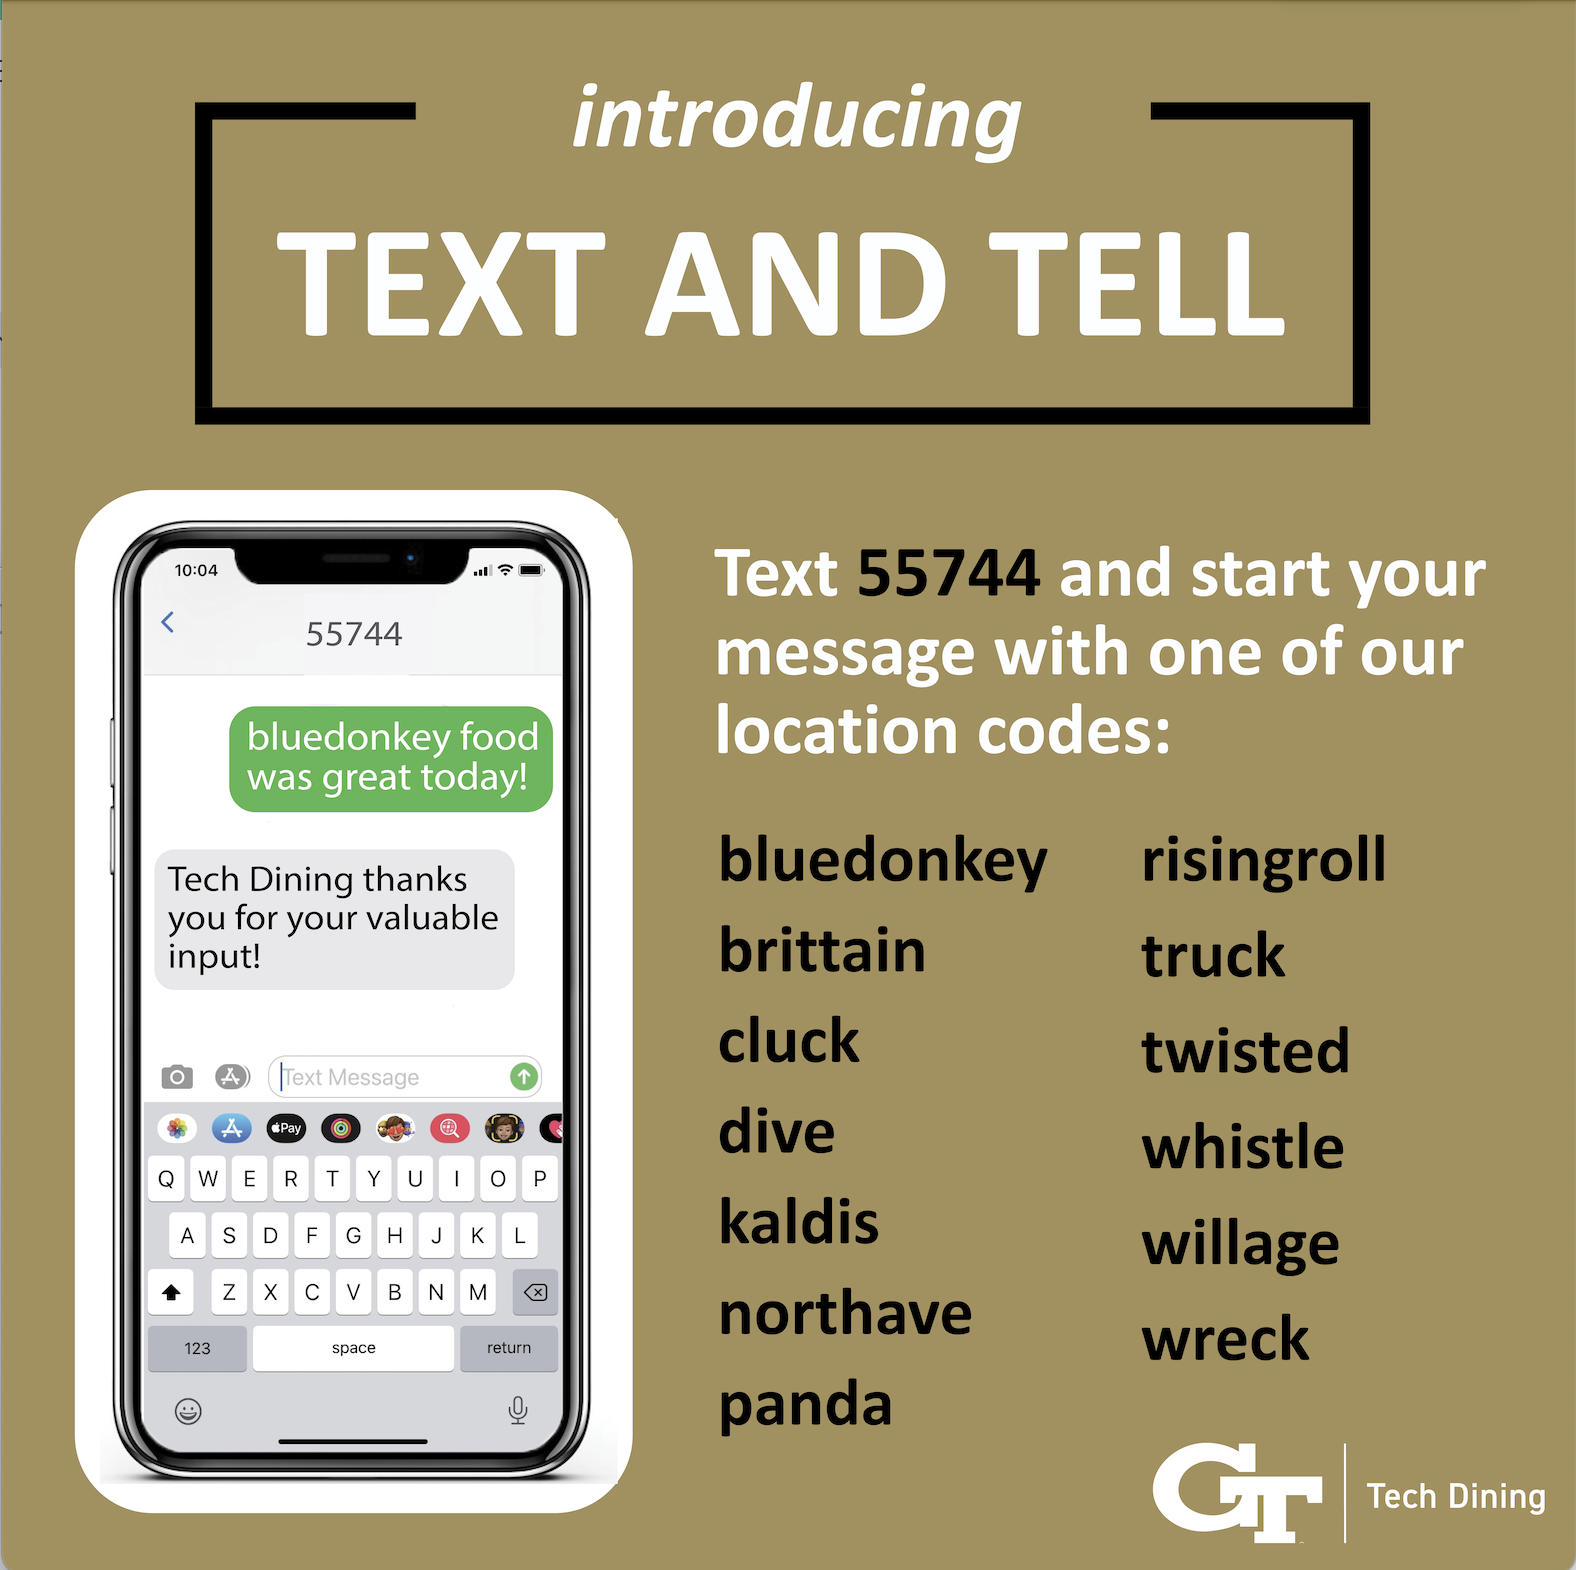 Guests can now text real-time feedback to Tech Dining managers using Text and Tell.  Text 55744 and start your message with the location code.  Messages are answered by on-duty managers.